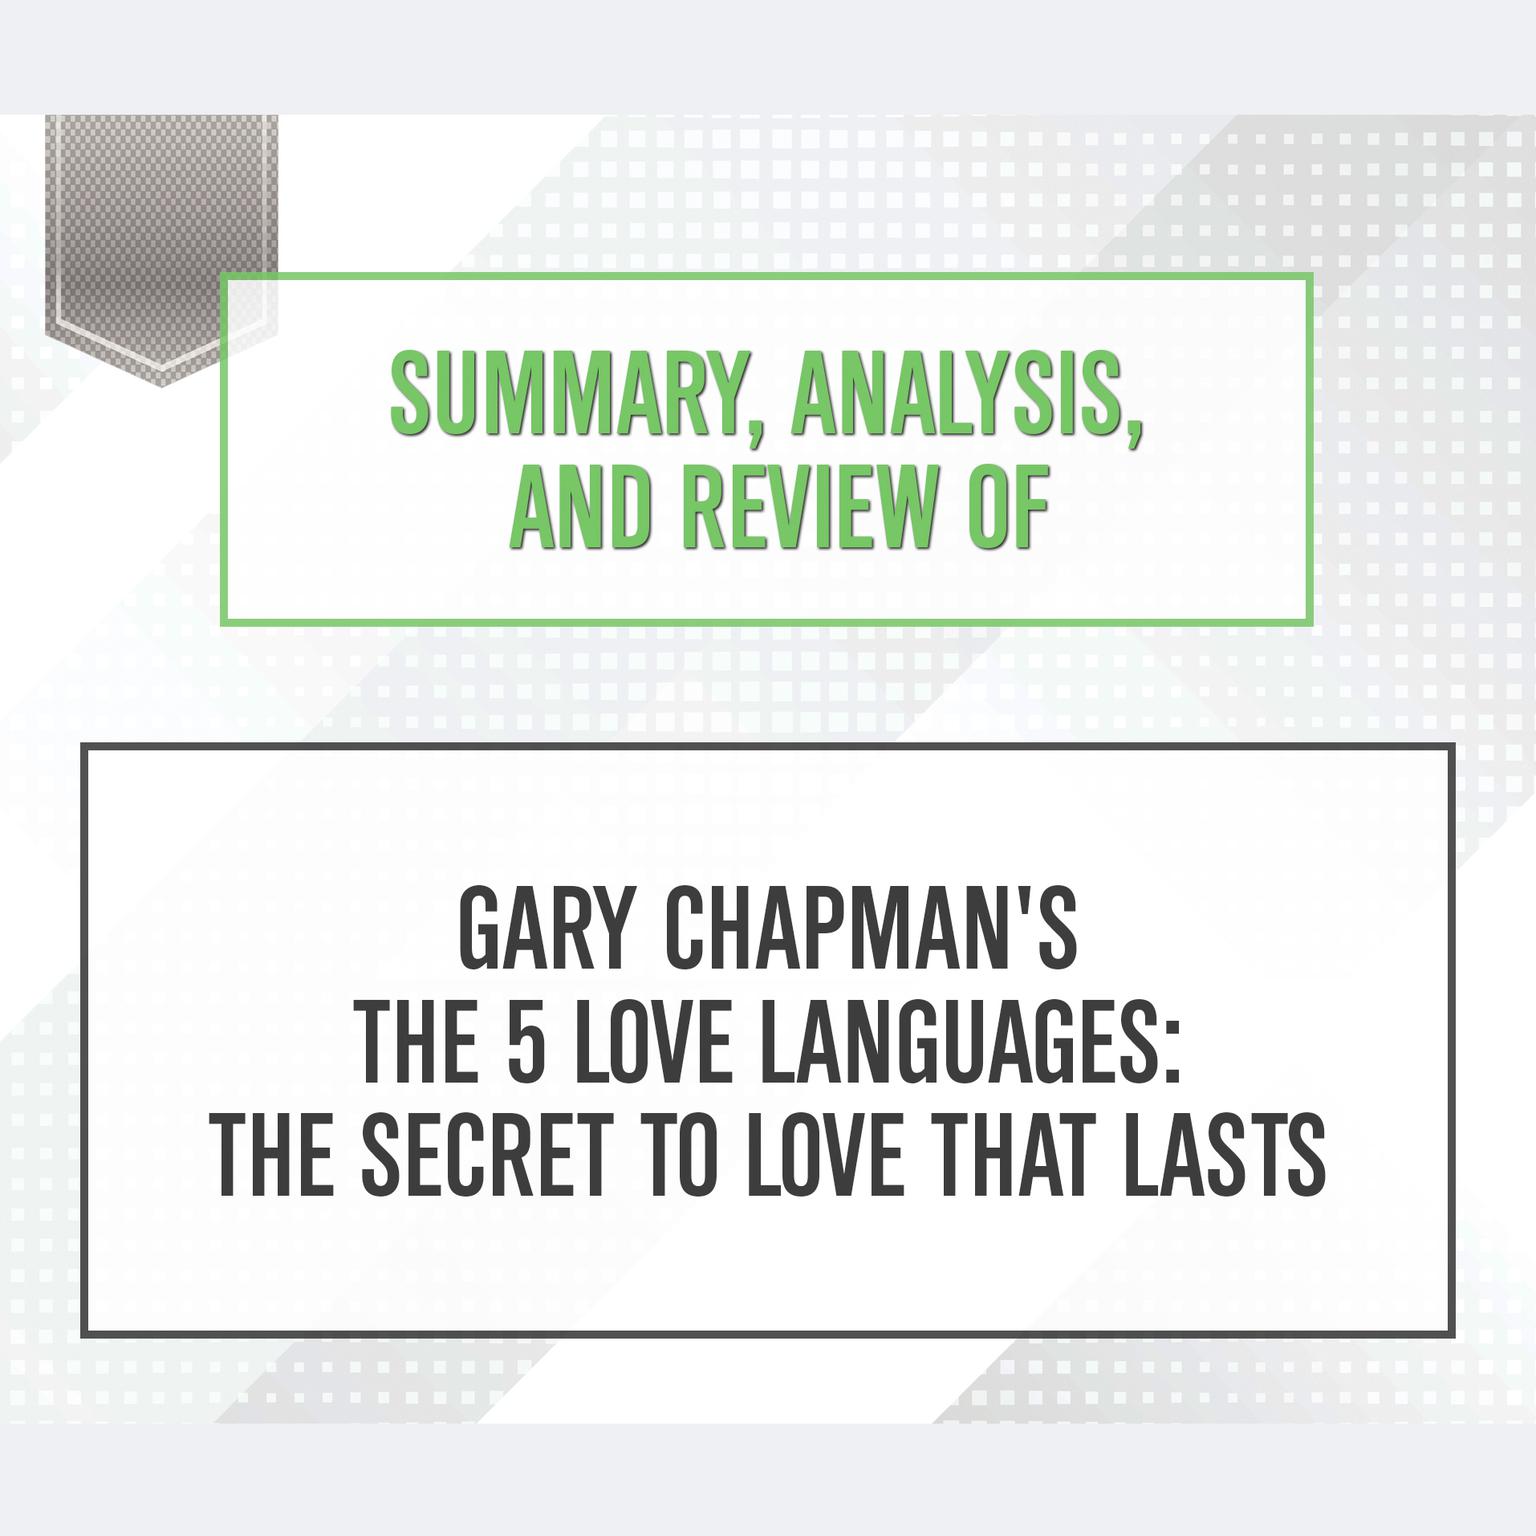 Summary, Analysis, and Review of Gary Chapmans The 5 Love Languages: The Secret to Love that Lasts Audiobook, by Start Publishing Notes